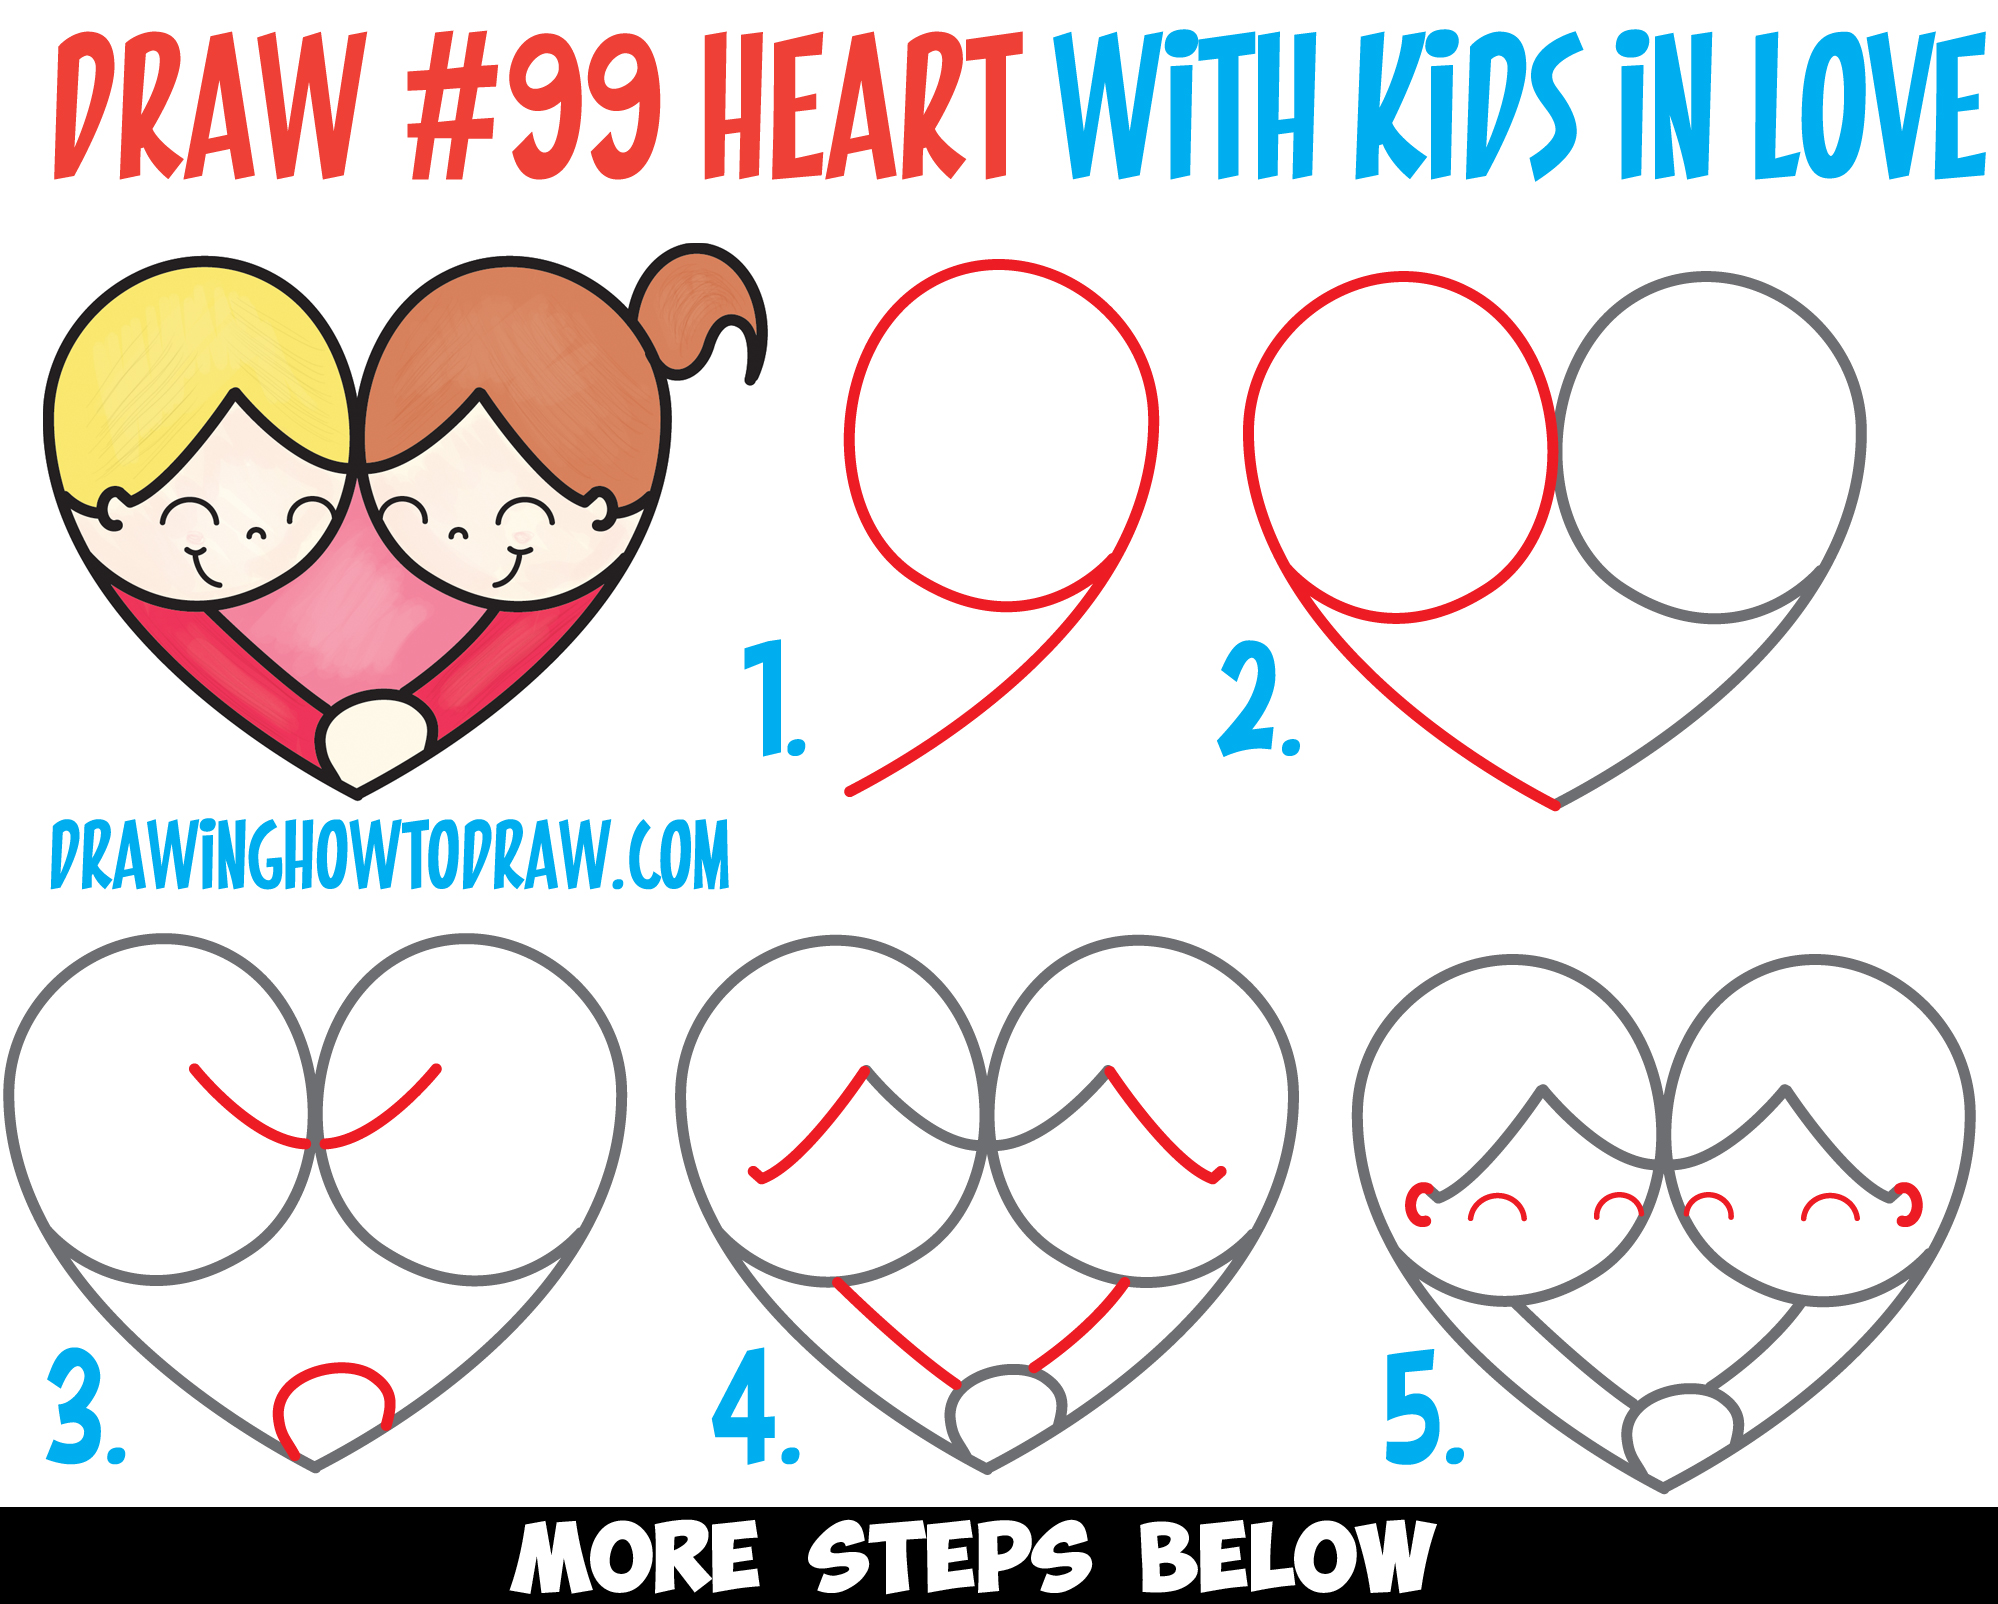 25 Cute Easy Heart Drawing Ideas - The Clever Heart, romantic drawing ideas  - thirstymag.com